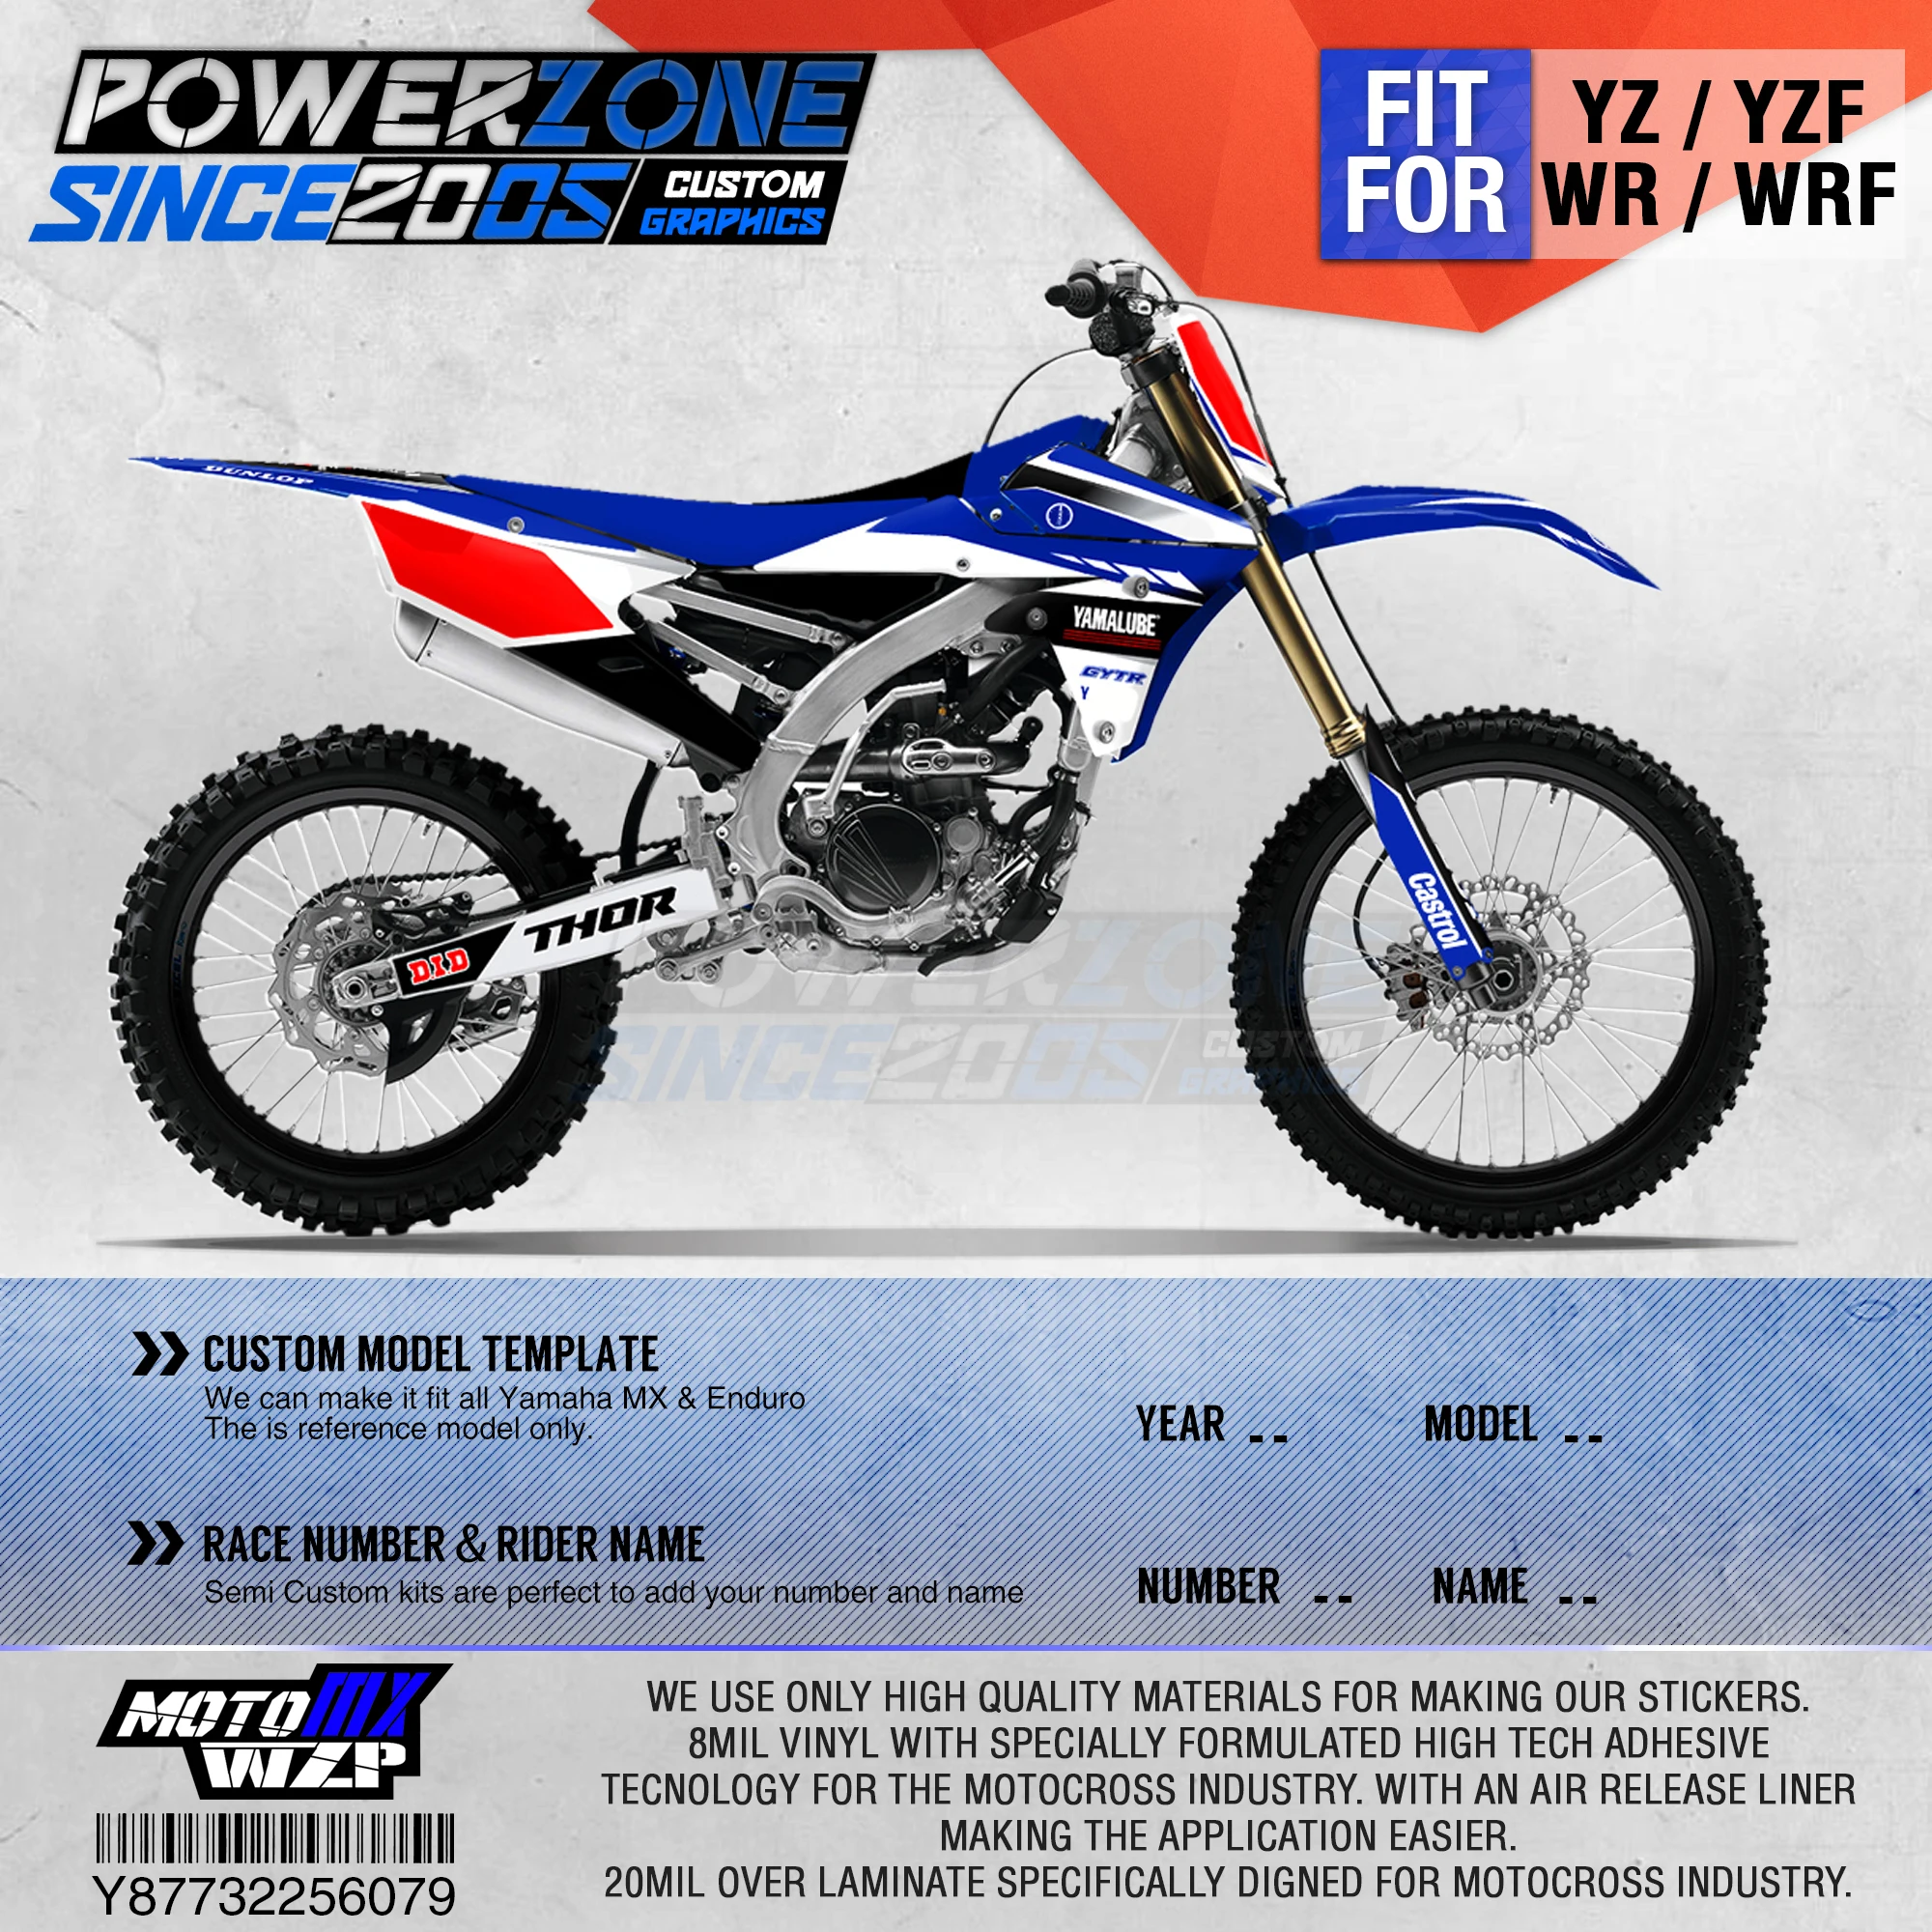 

PowerZone Customized Team Graphics Backgrounds Decals 3M Custom Stickers For YAMAHA YZF250FX 14-18 YFZ 19 YZF450 14-17 18-19 079